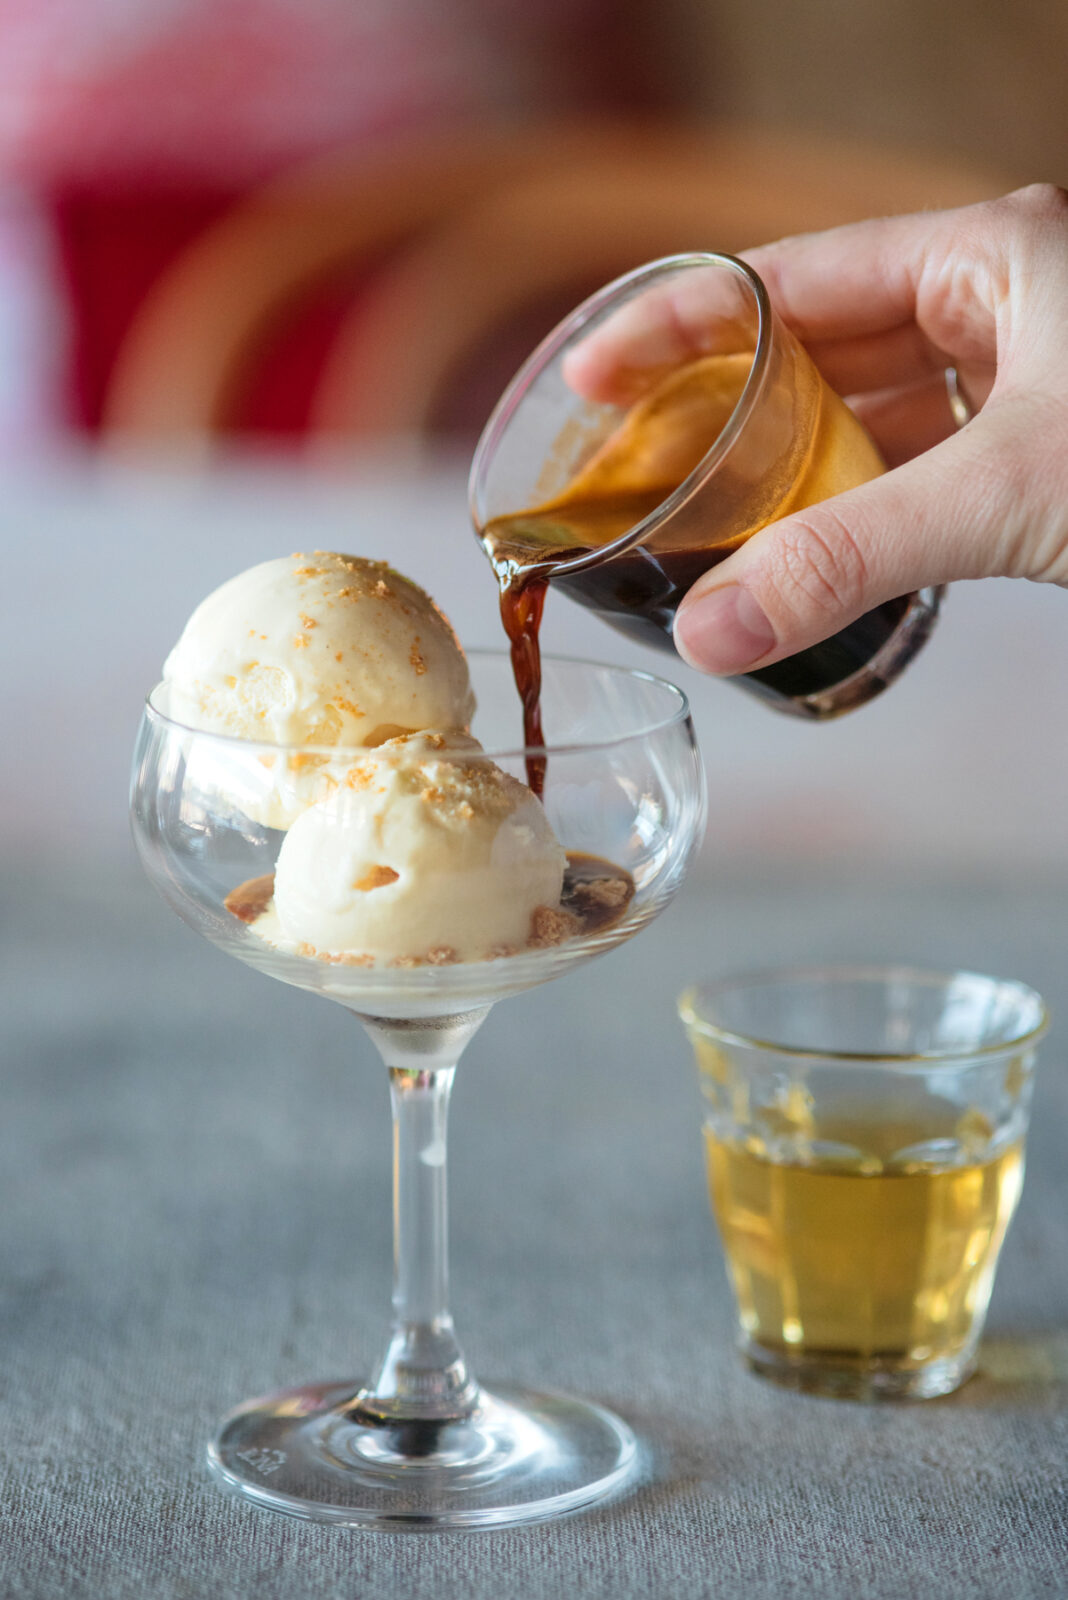 How to Make the Best Affogato? The Ultimate Italian Dessert